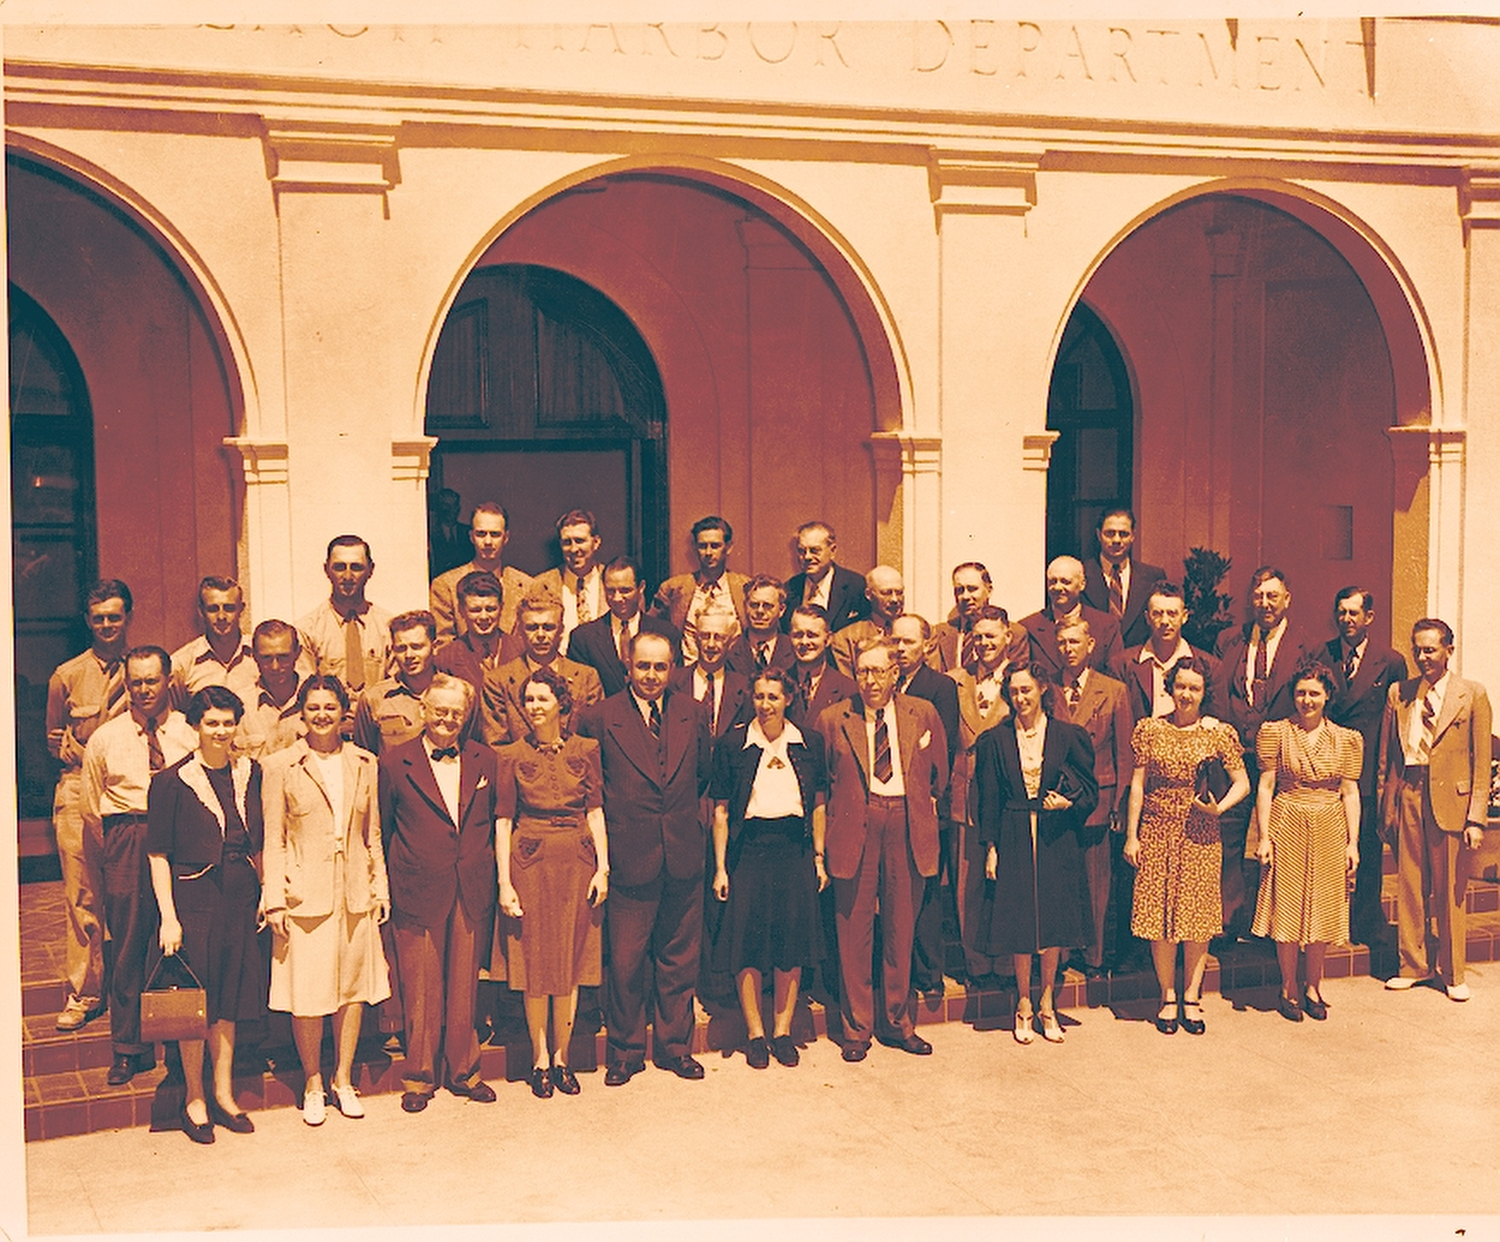 Harbor Department staff gather for a group shot around 1940. Eloi ÒFrenchyÓ Amar, Port general manager at the time, is the tall man with his jacket buttoned near the center of the front row.